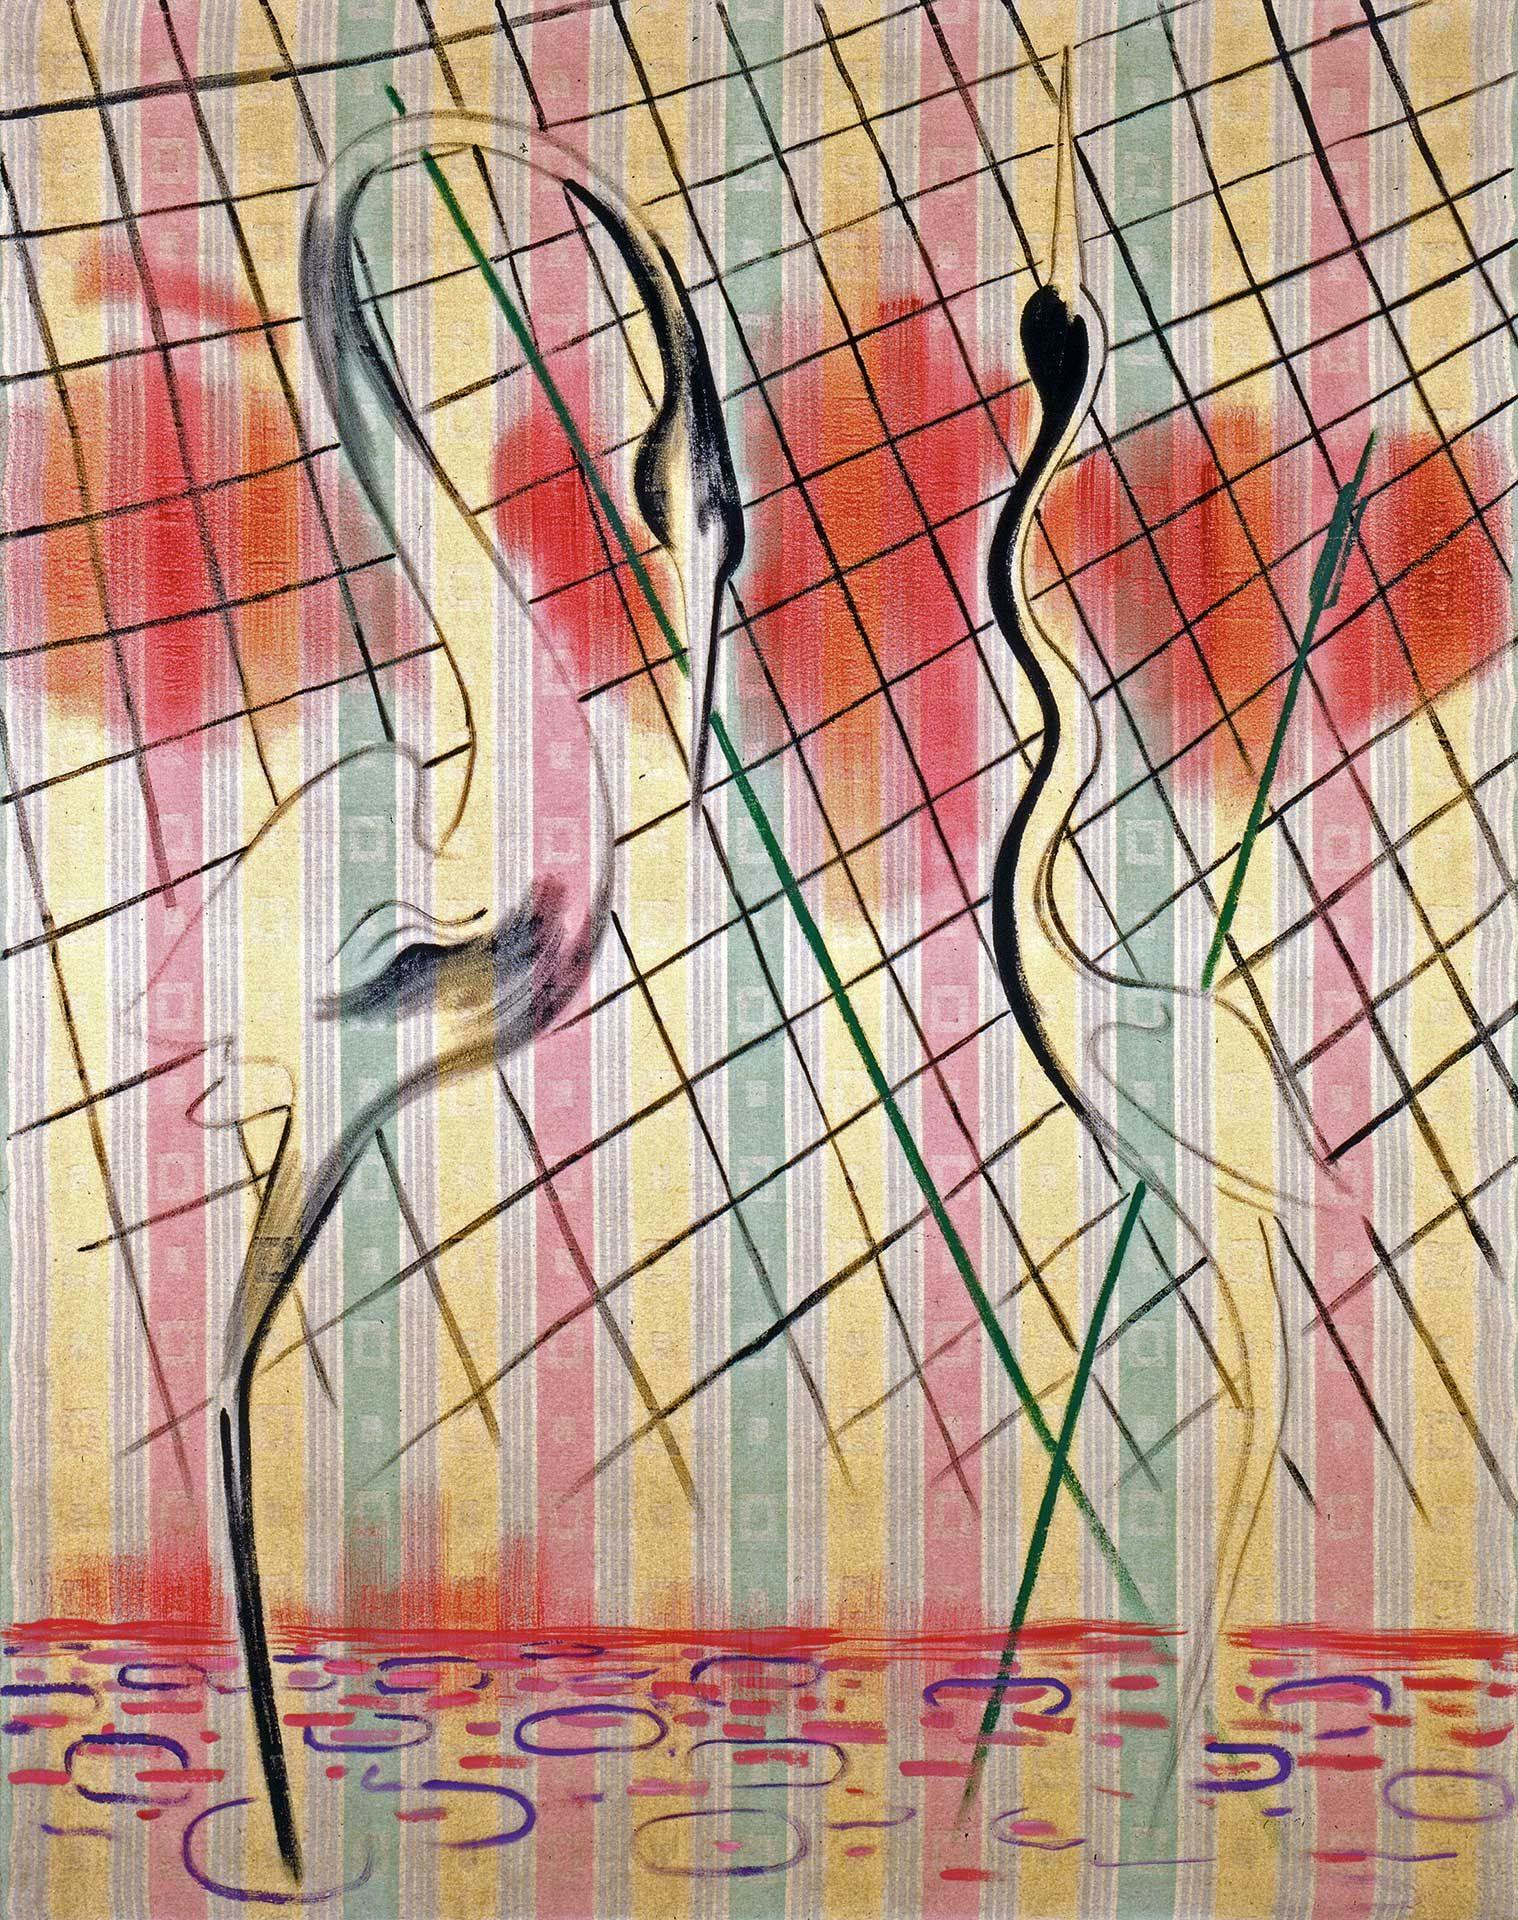 A painting by Sigmar Polke titled Reiherbild I, translated as Heron Painting I, dated 1968.